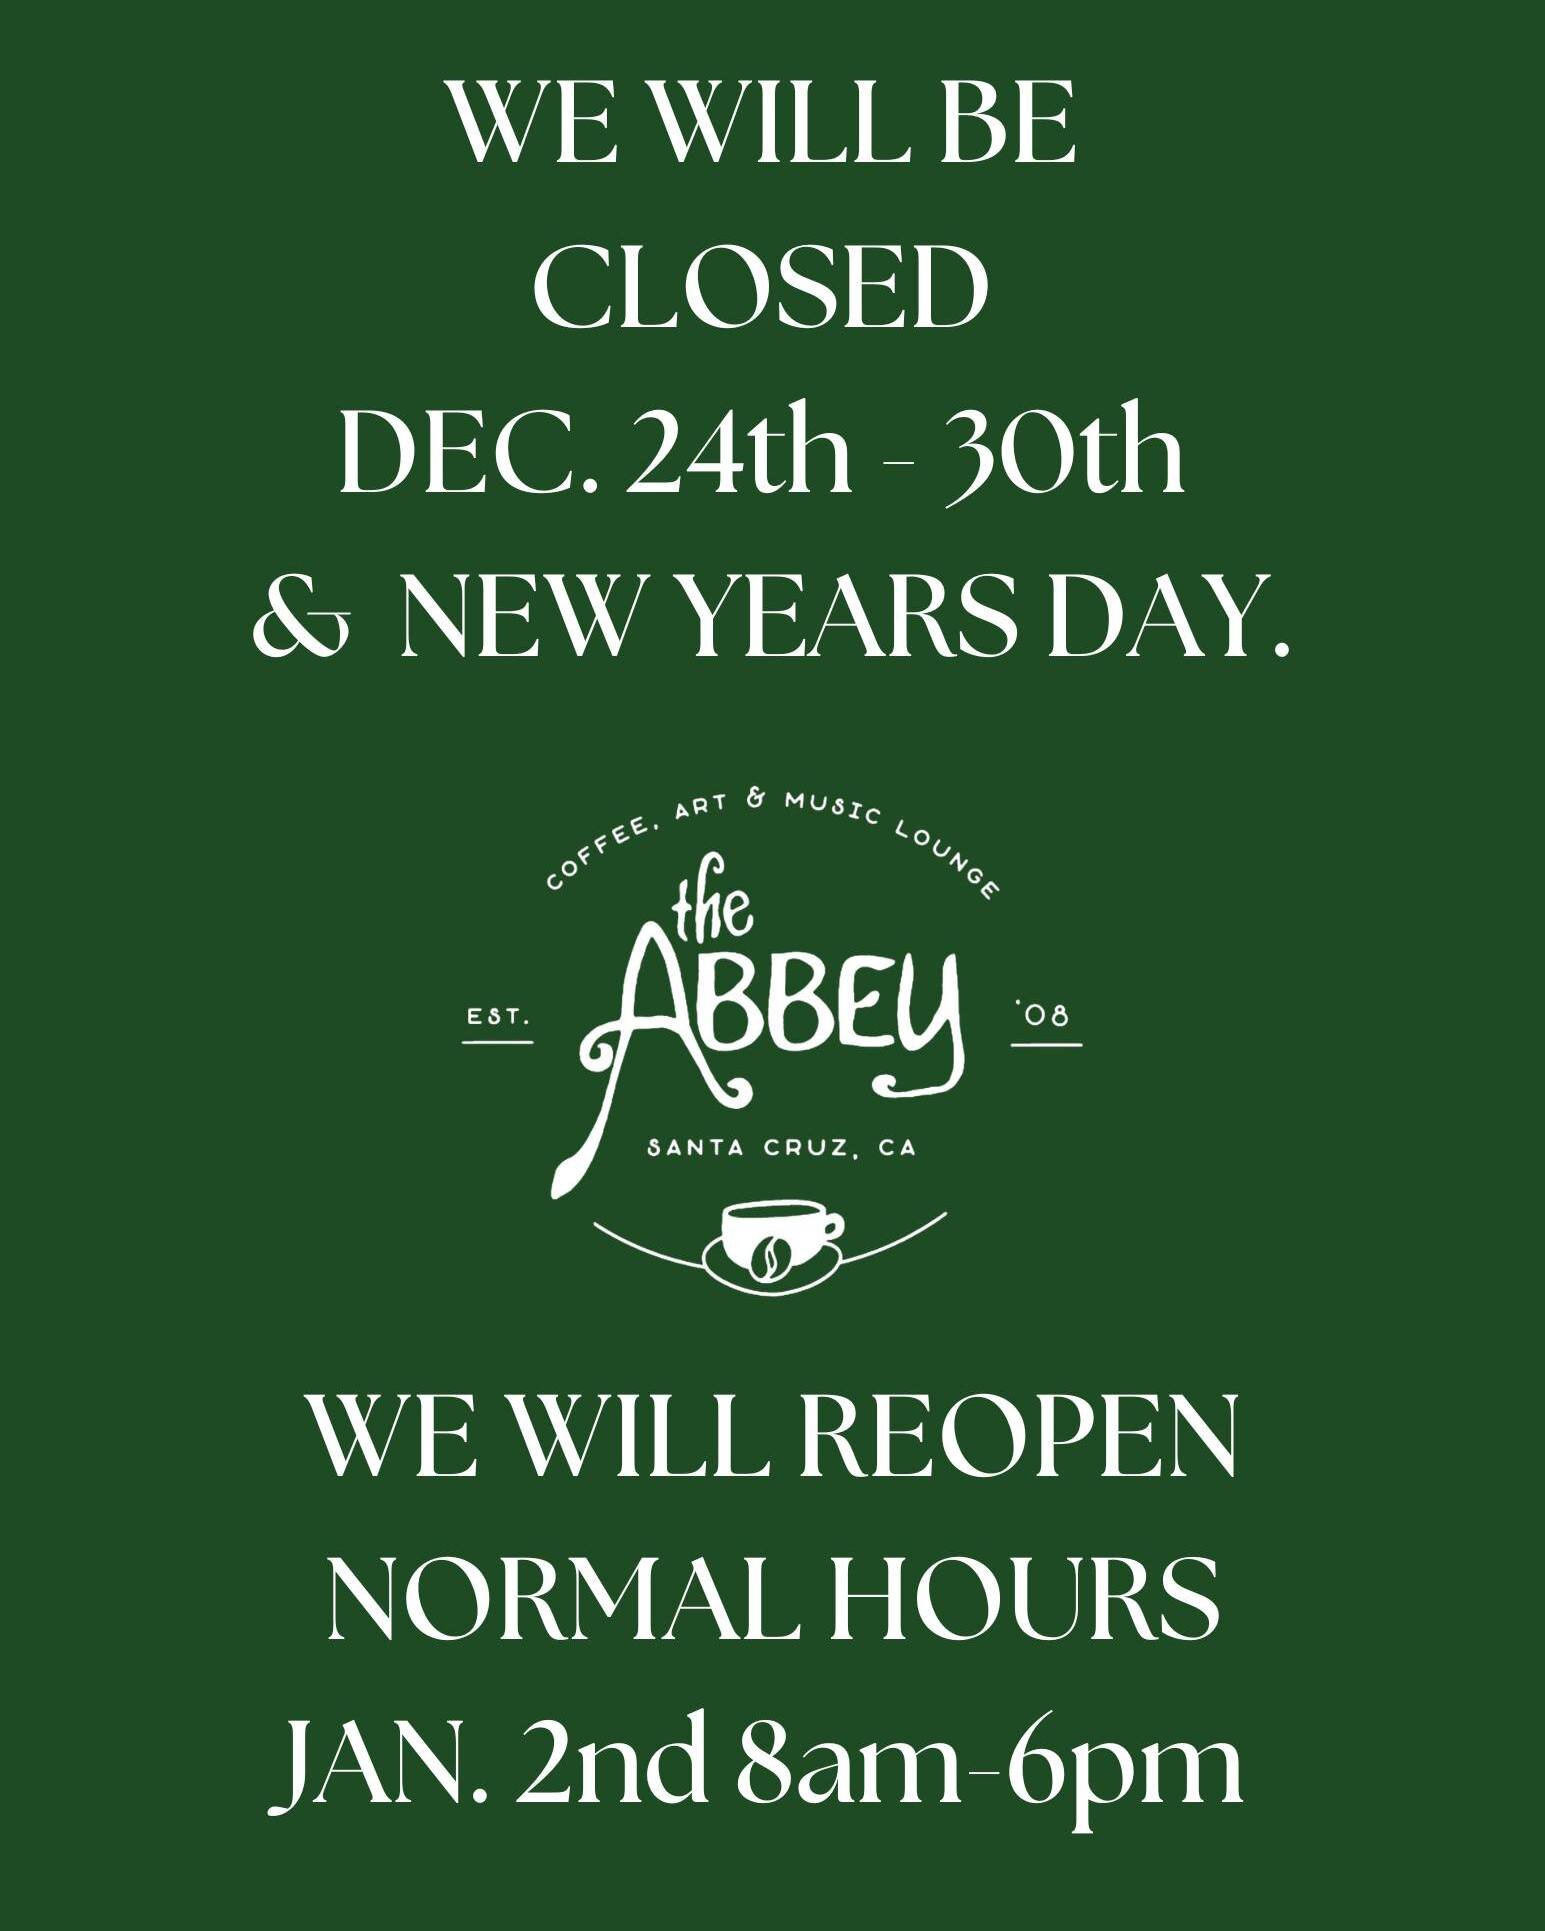 Hello friends! We will be closed from Dec. 24th-30th so employees can have a great time with family. Open Sunday the 31st, and closed on New Years. Regular hours start again on January 2nd! See you all again soon!
#theabbeysc